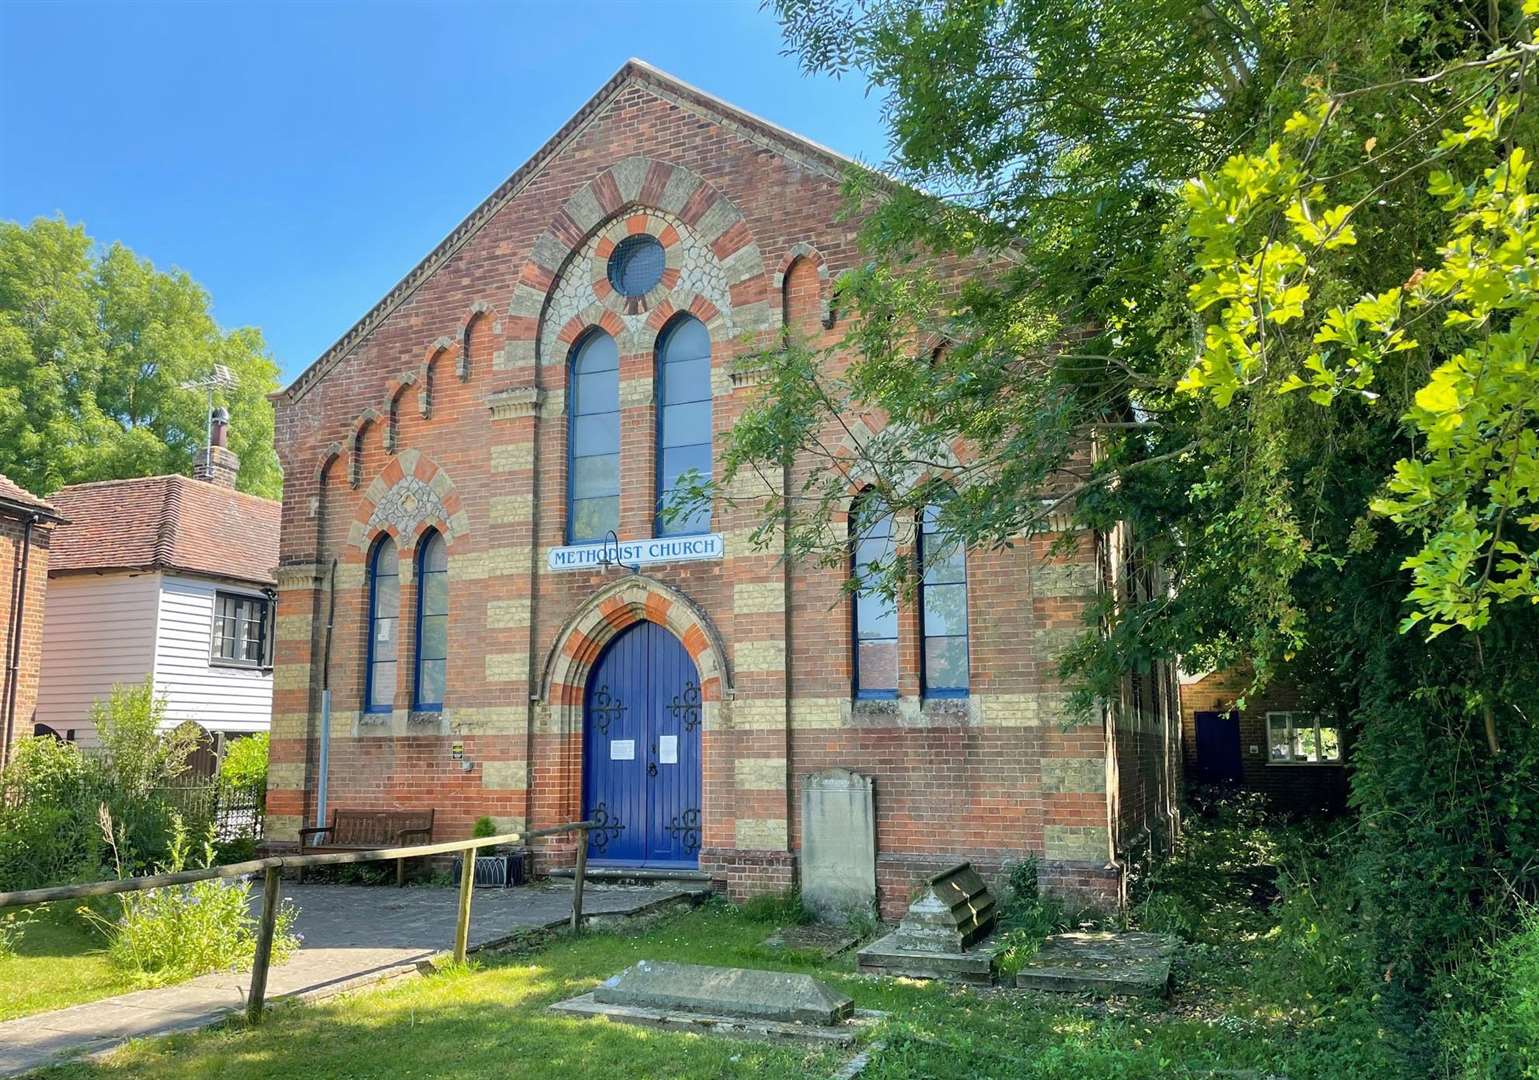 The former Methodist church in Headcorn is for sale at auction. Picture: Clive Emson